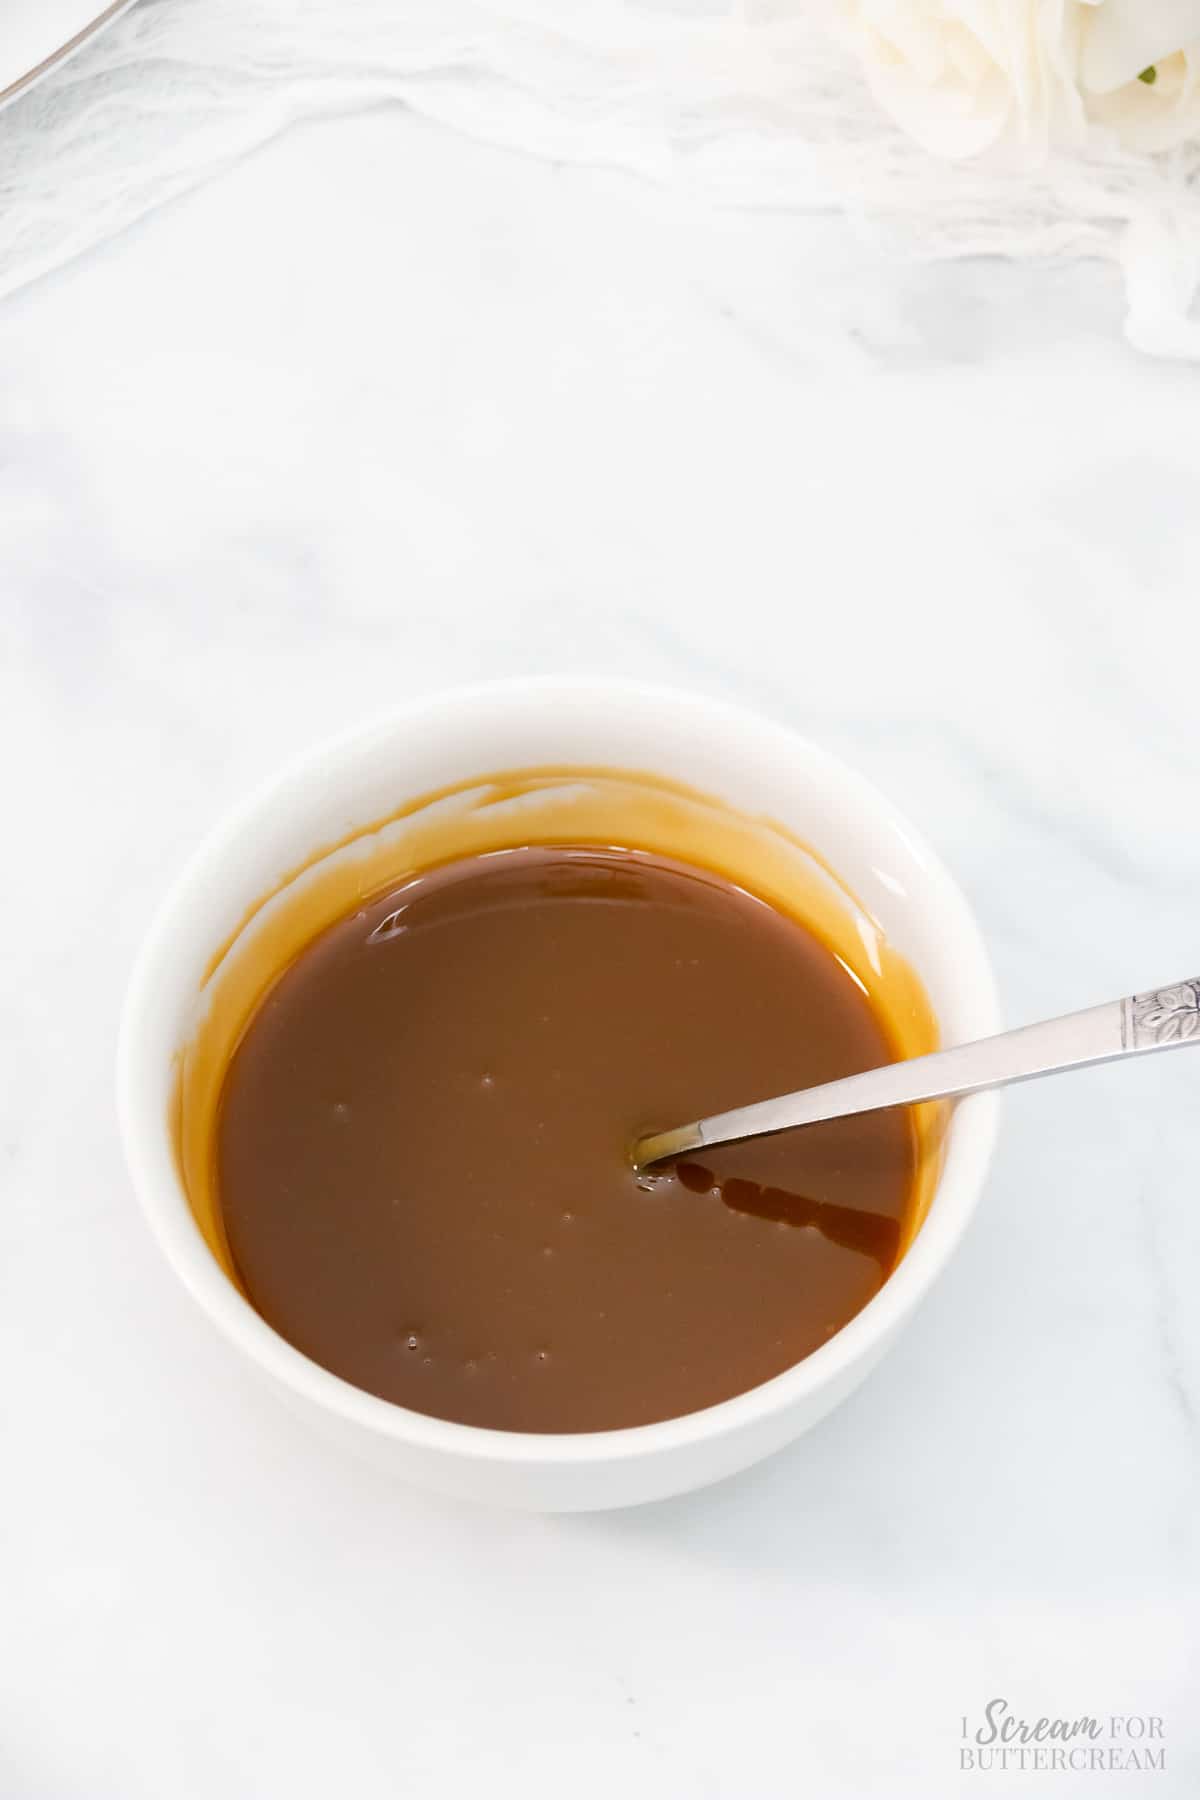 Warmed caramel sauce in a white bowl.